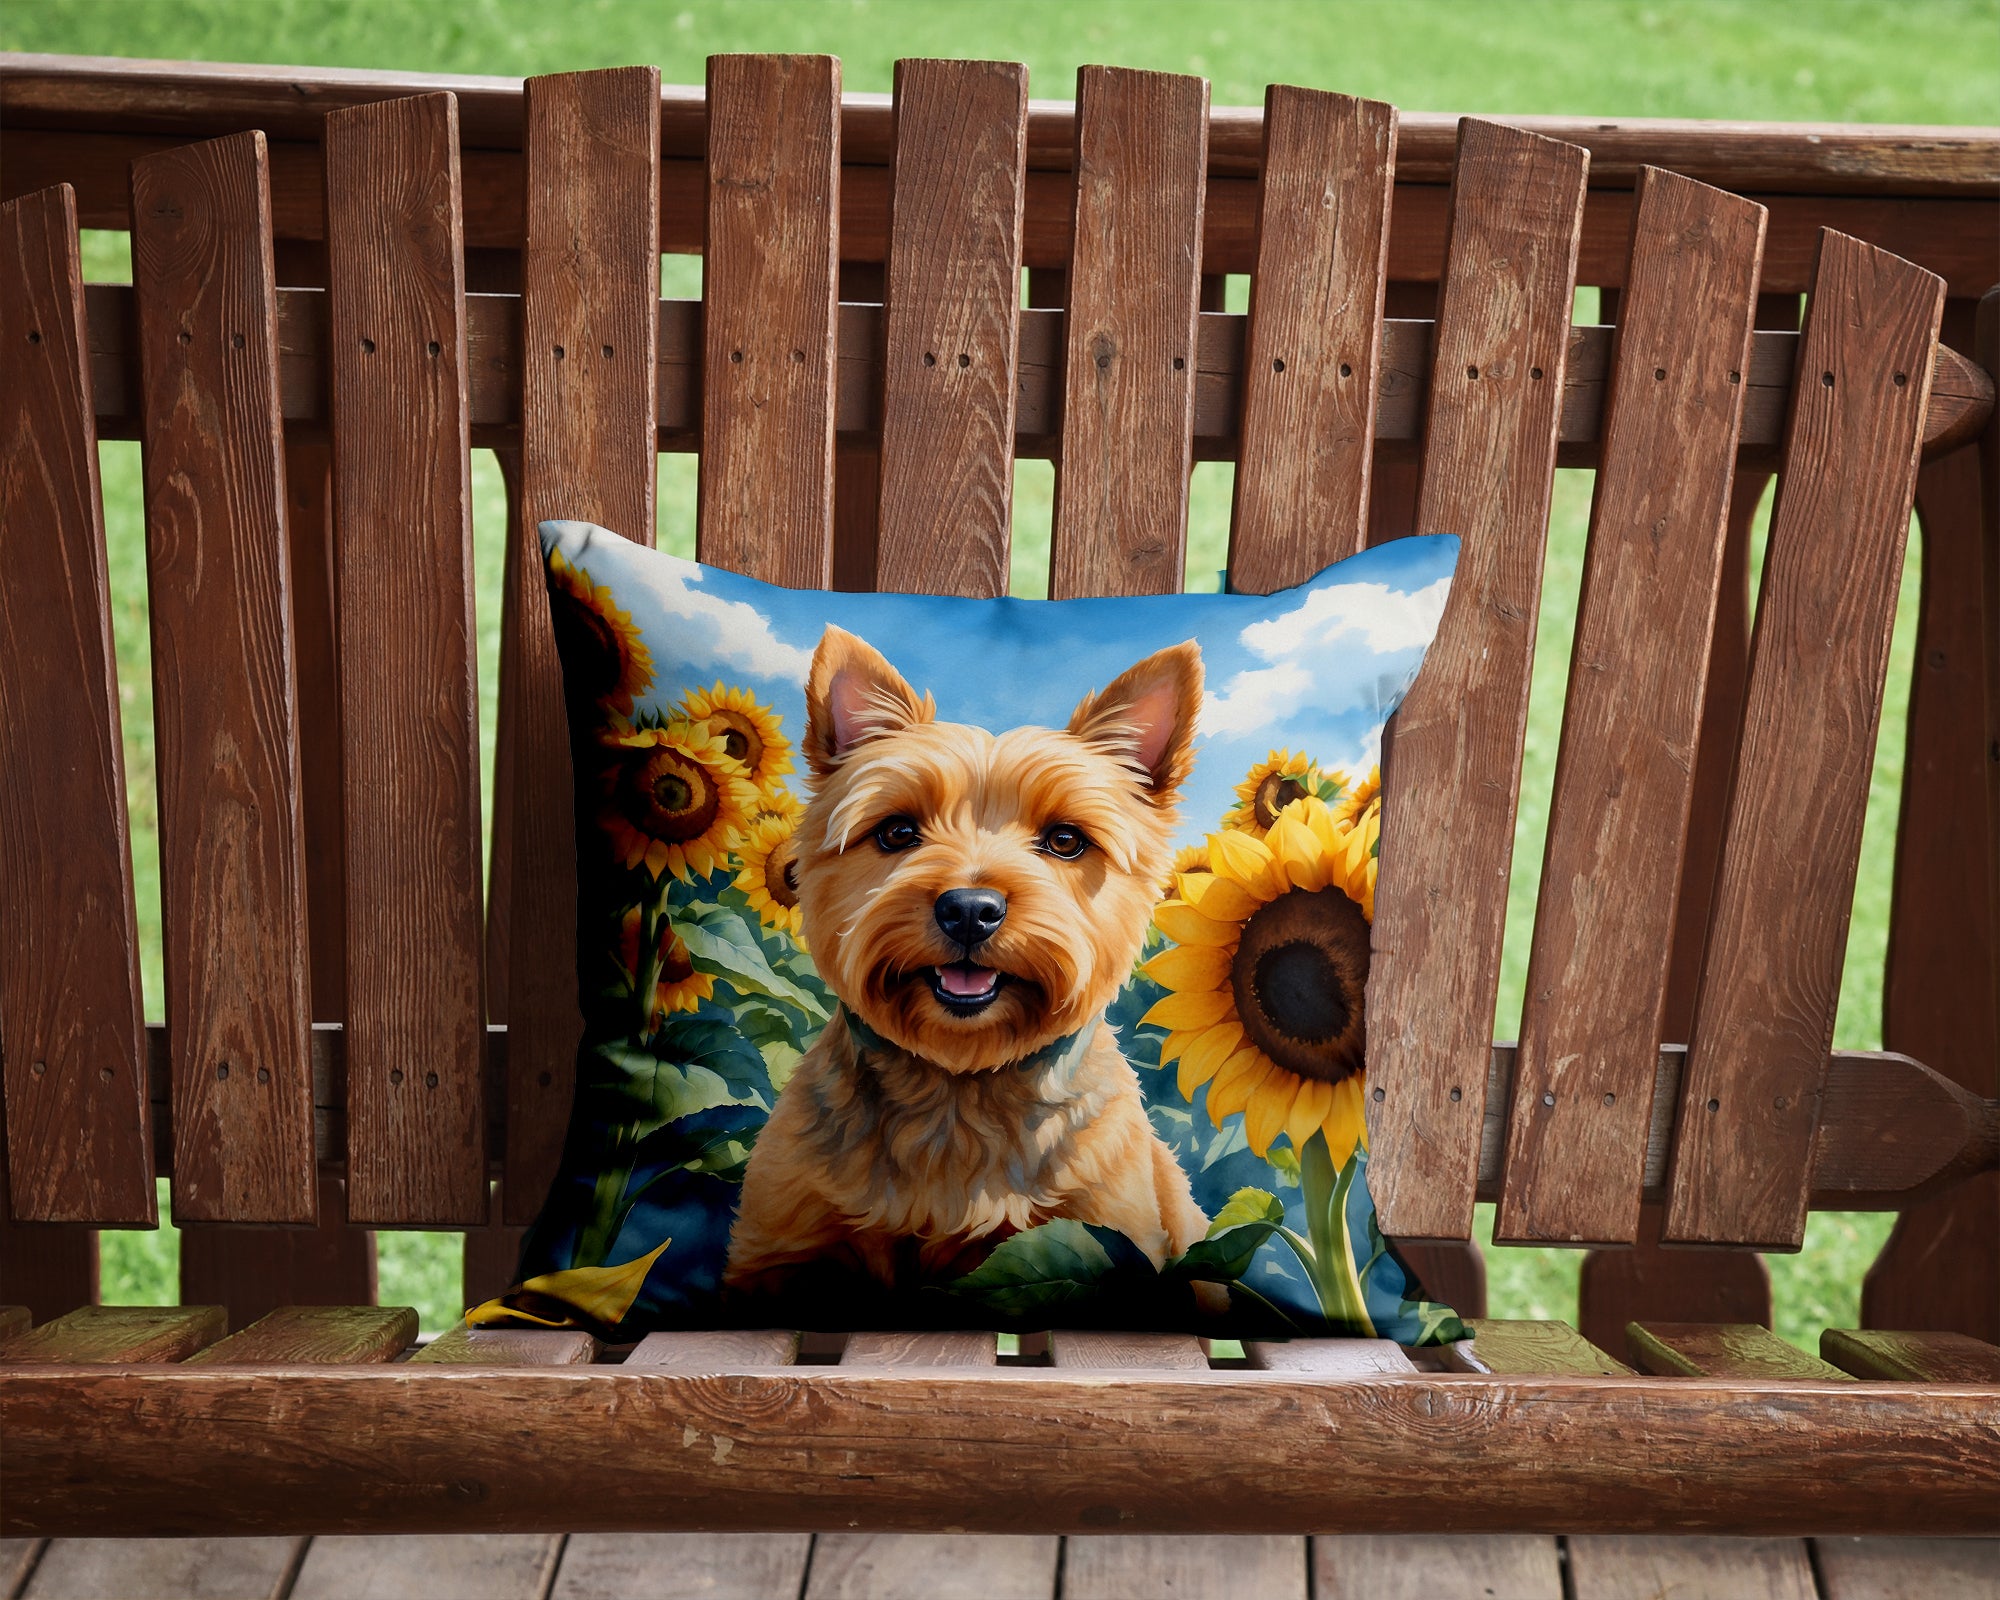 Buy this Norwich Terrier in Sunflowers Throw Pillow